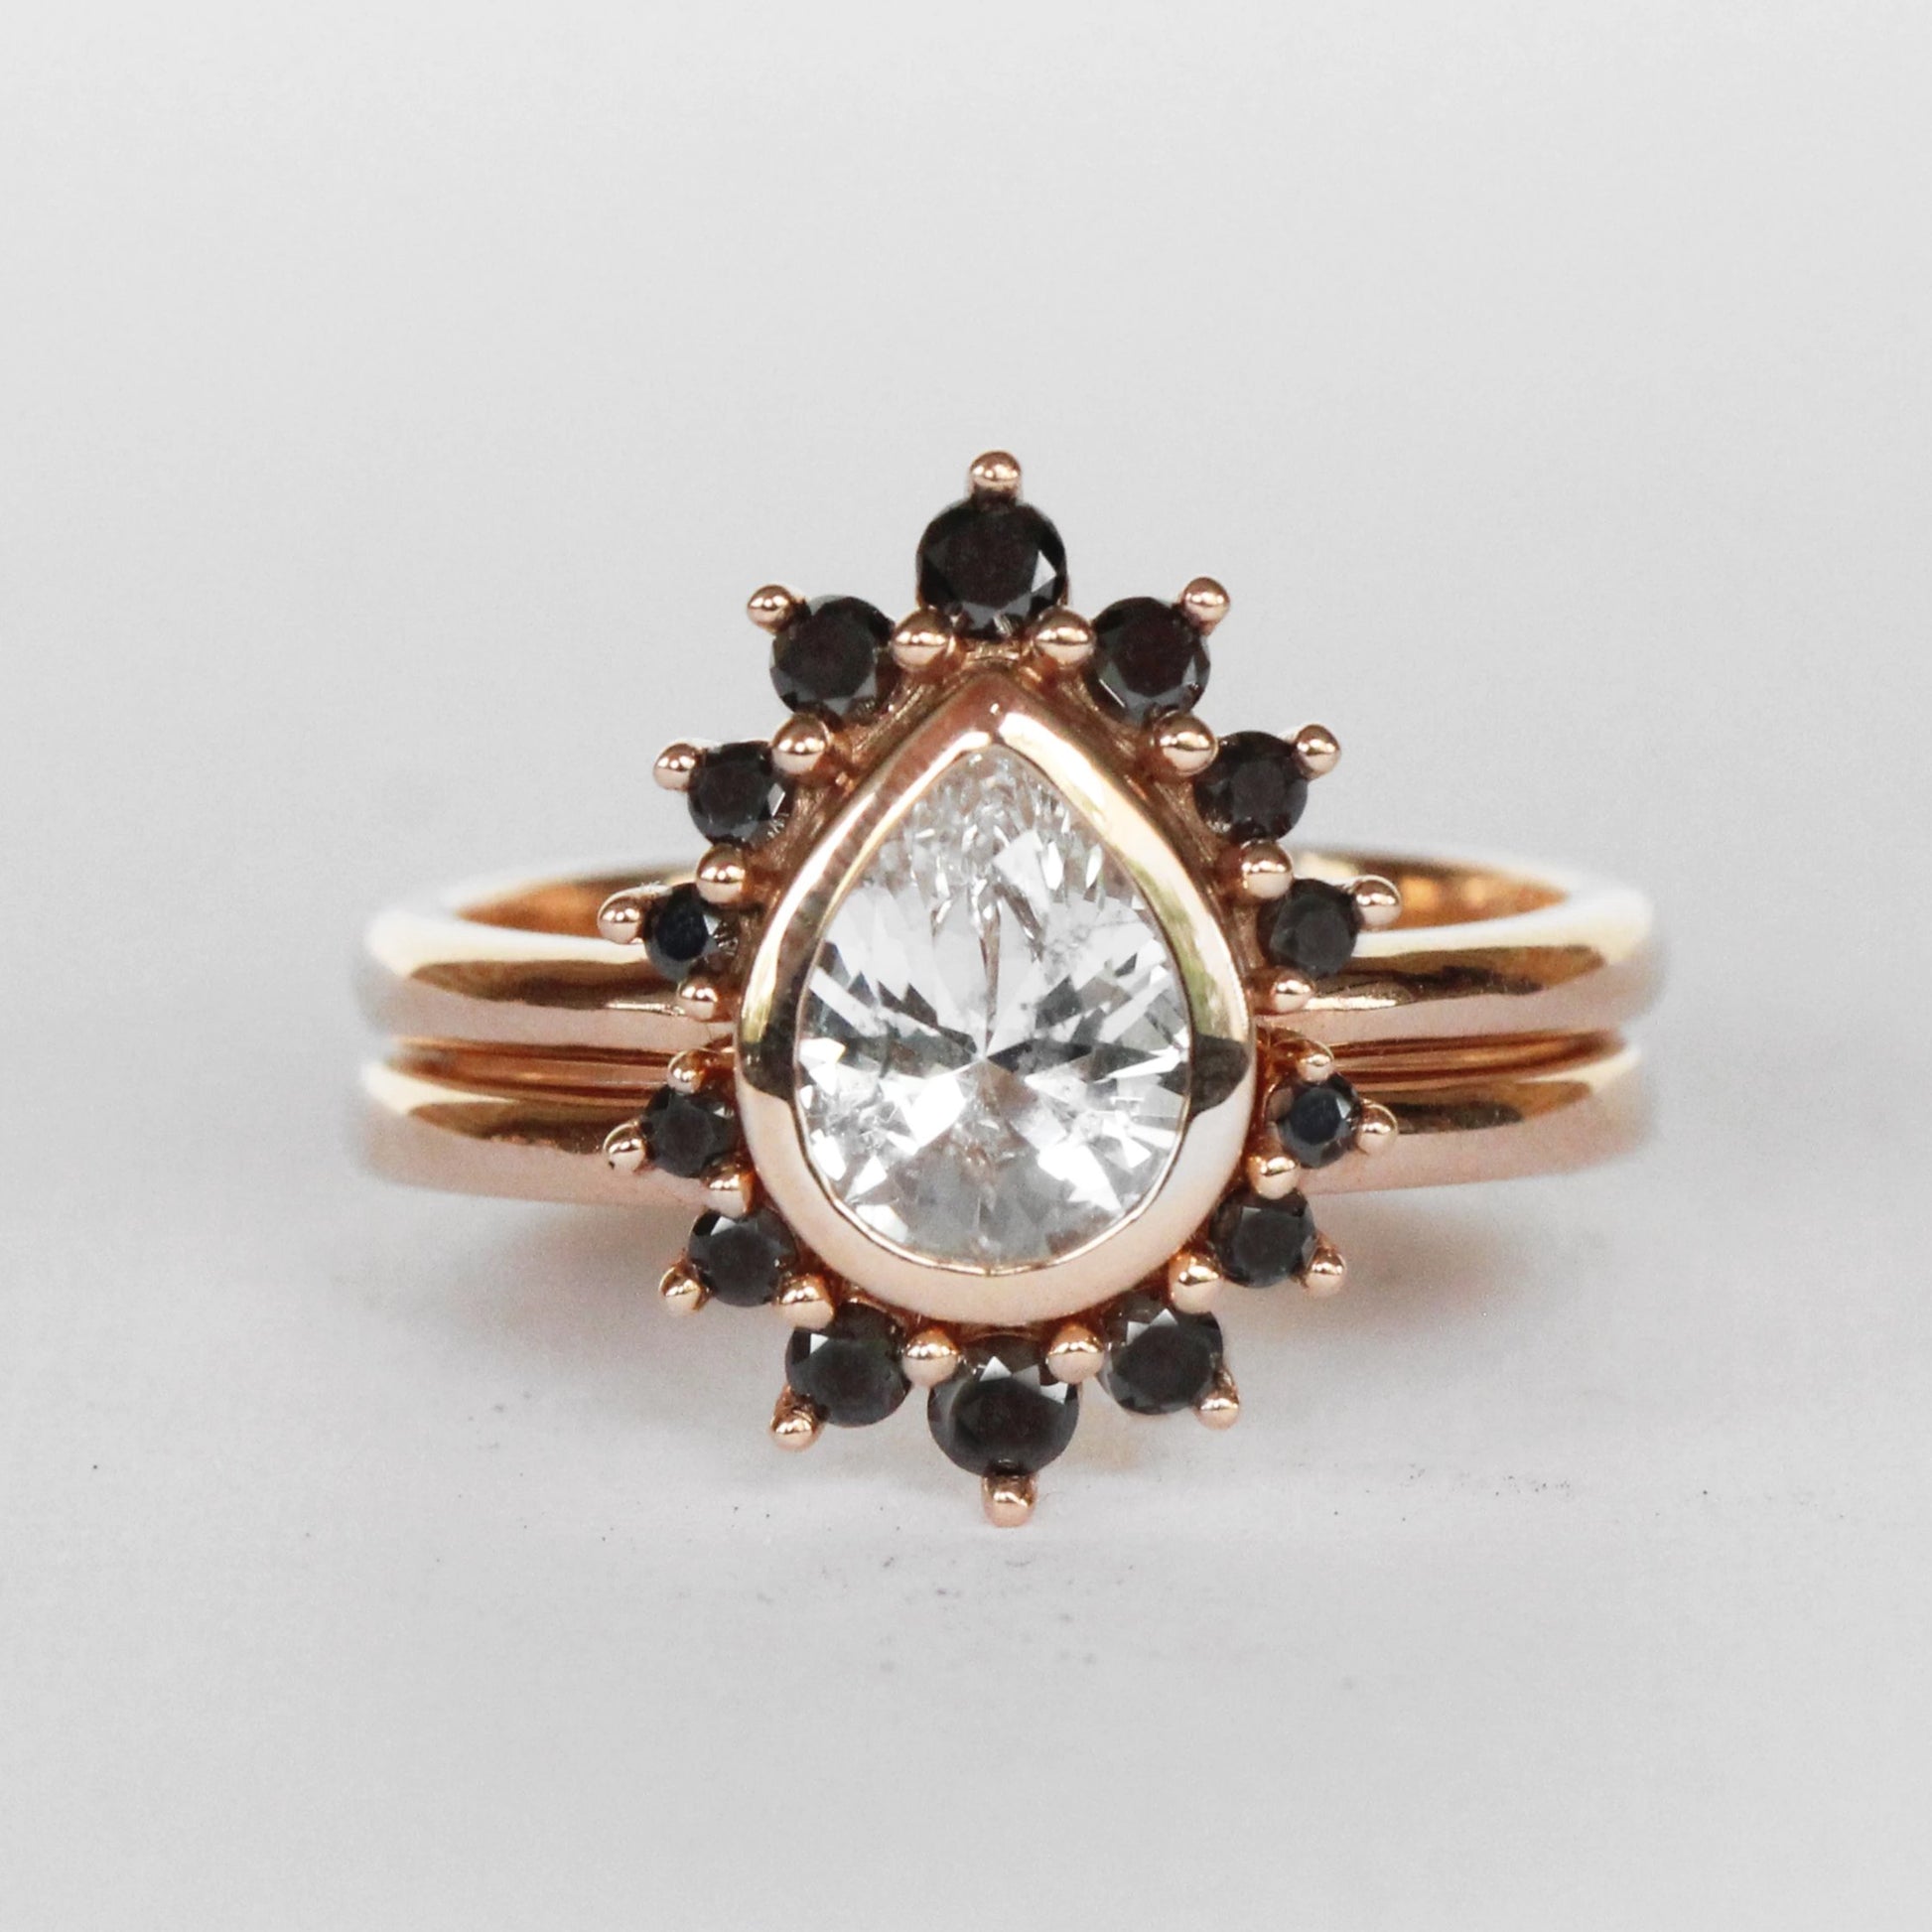 Ashlyn Ring with White Sapphire and Black Diamonds in 14k Gold - Midwinter Co. Alternative Bridal Rings and Modern Fine Jewelry